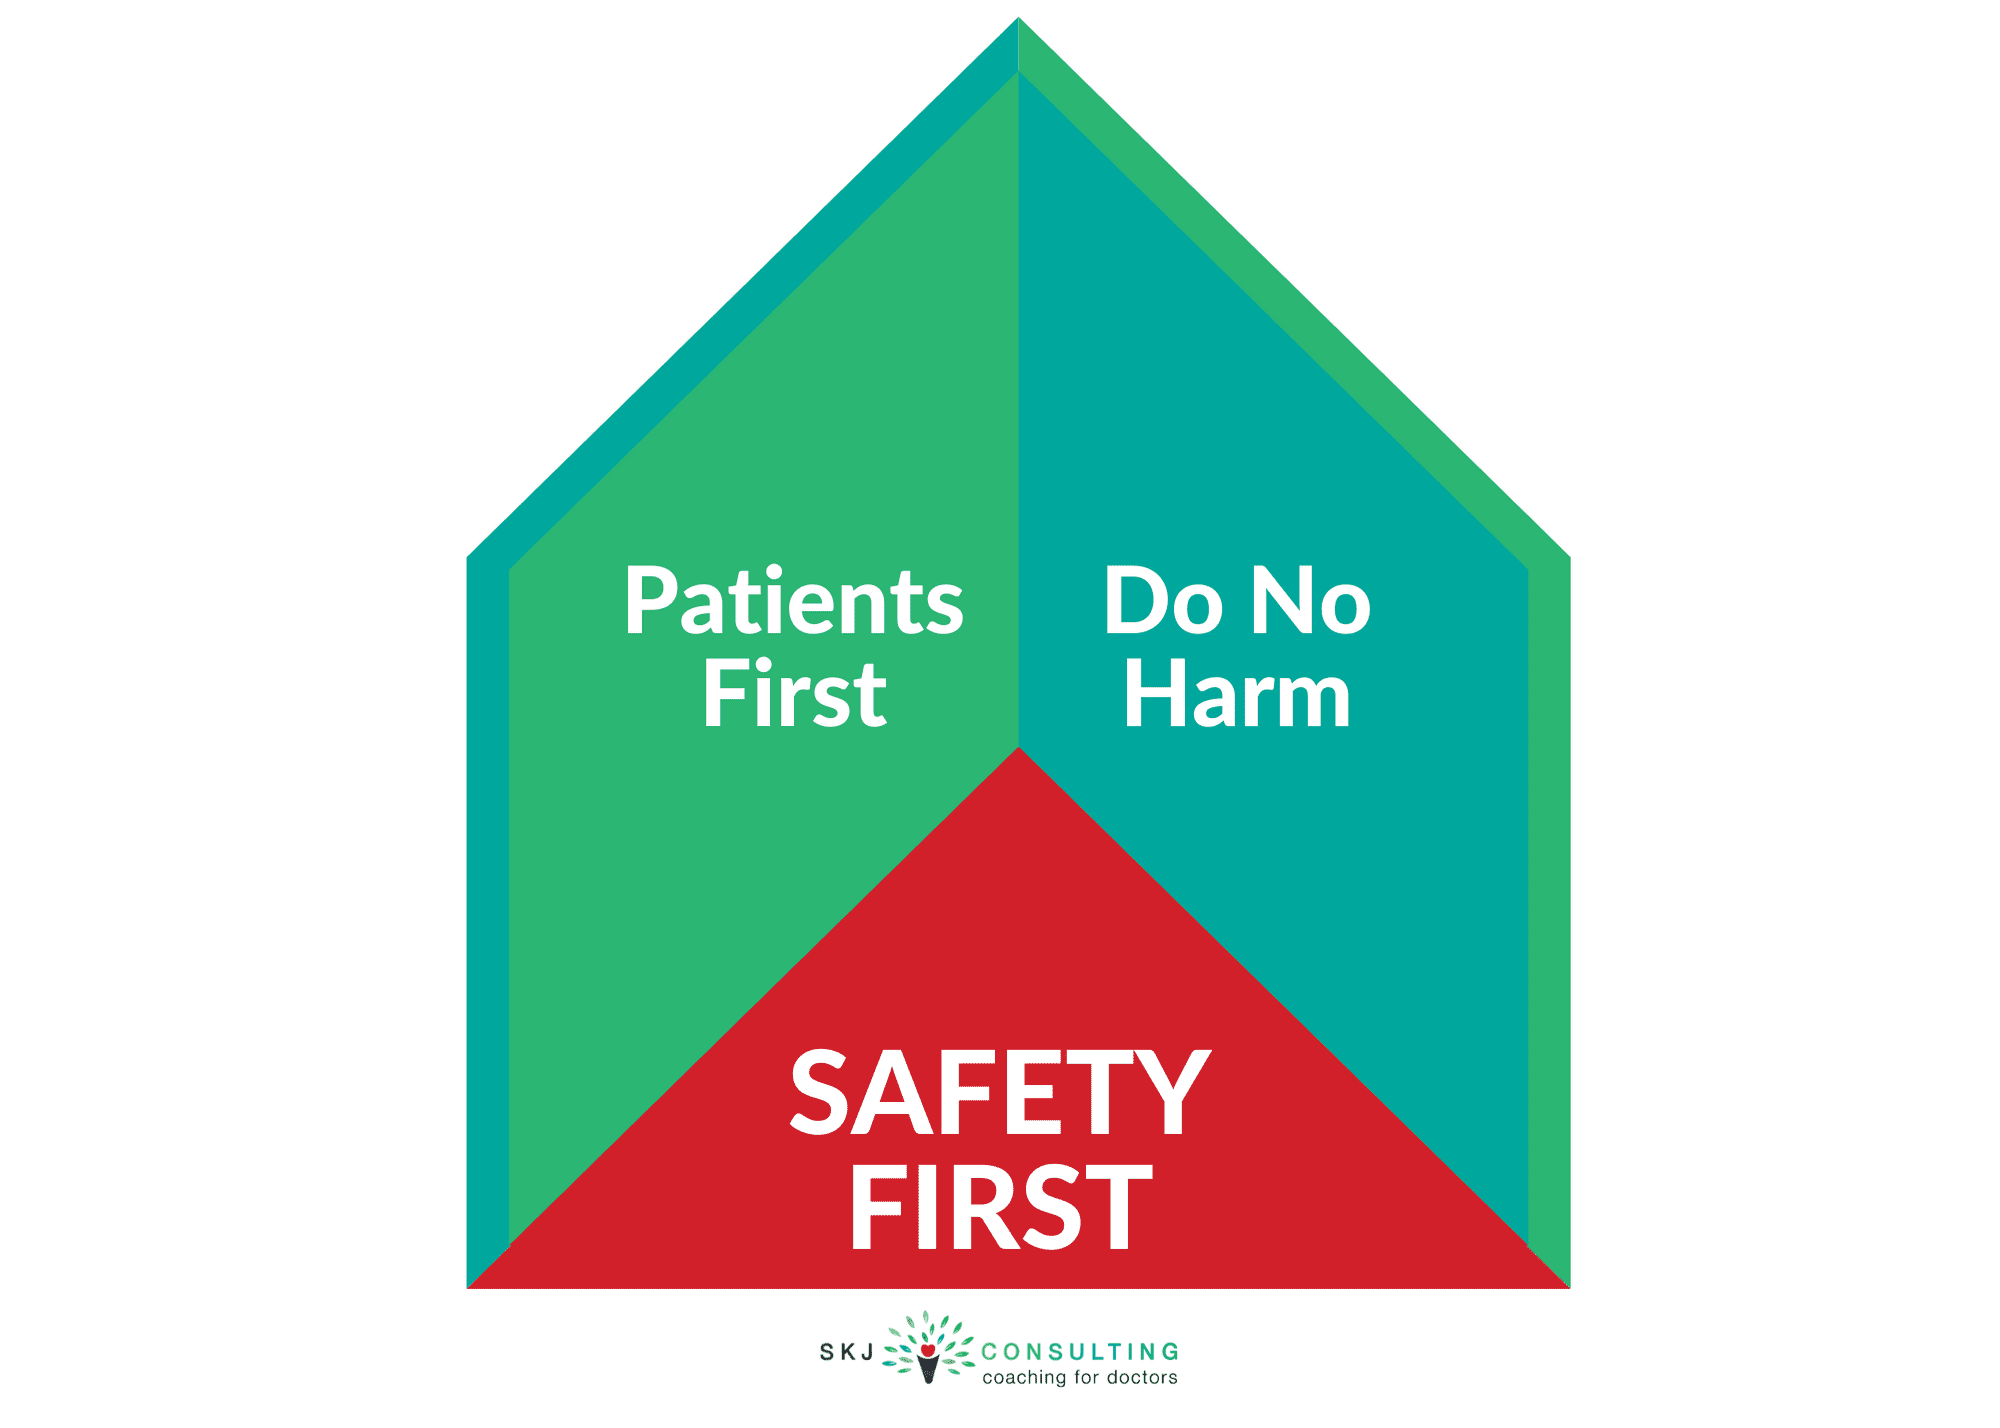 House image with words 'Safety First' as foundation, 'Patients First' and Do No Harm' as sides/walls